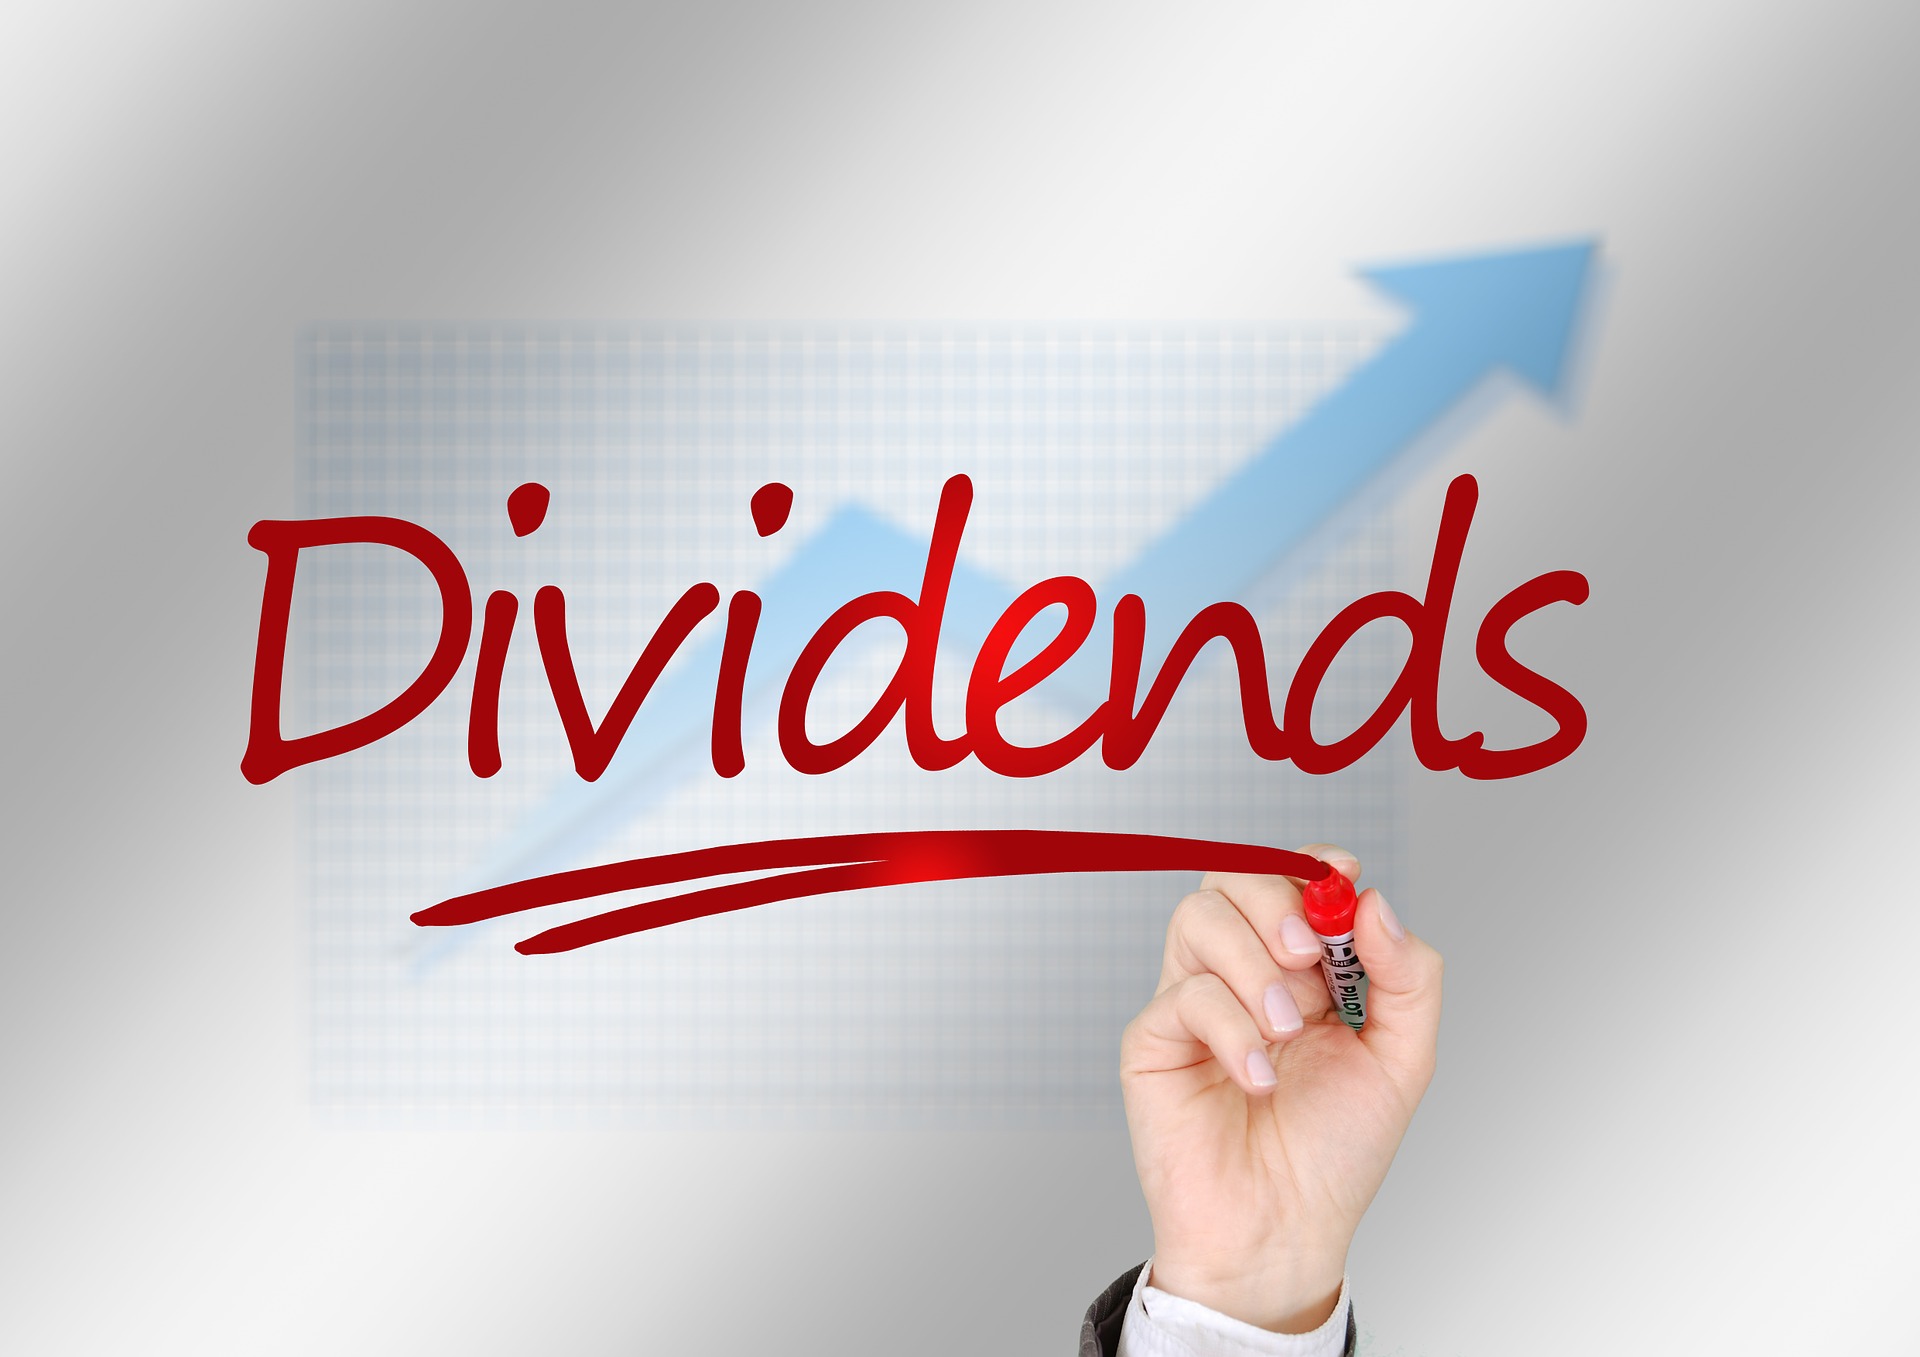 Dividend stocks are in vogue again